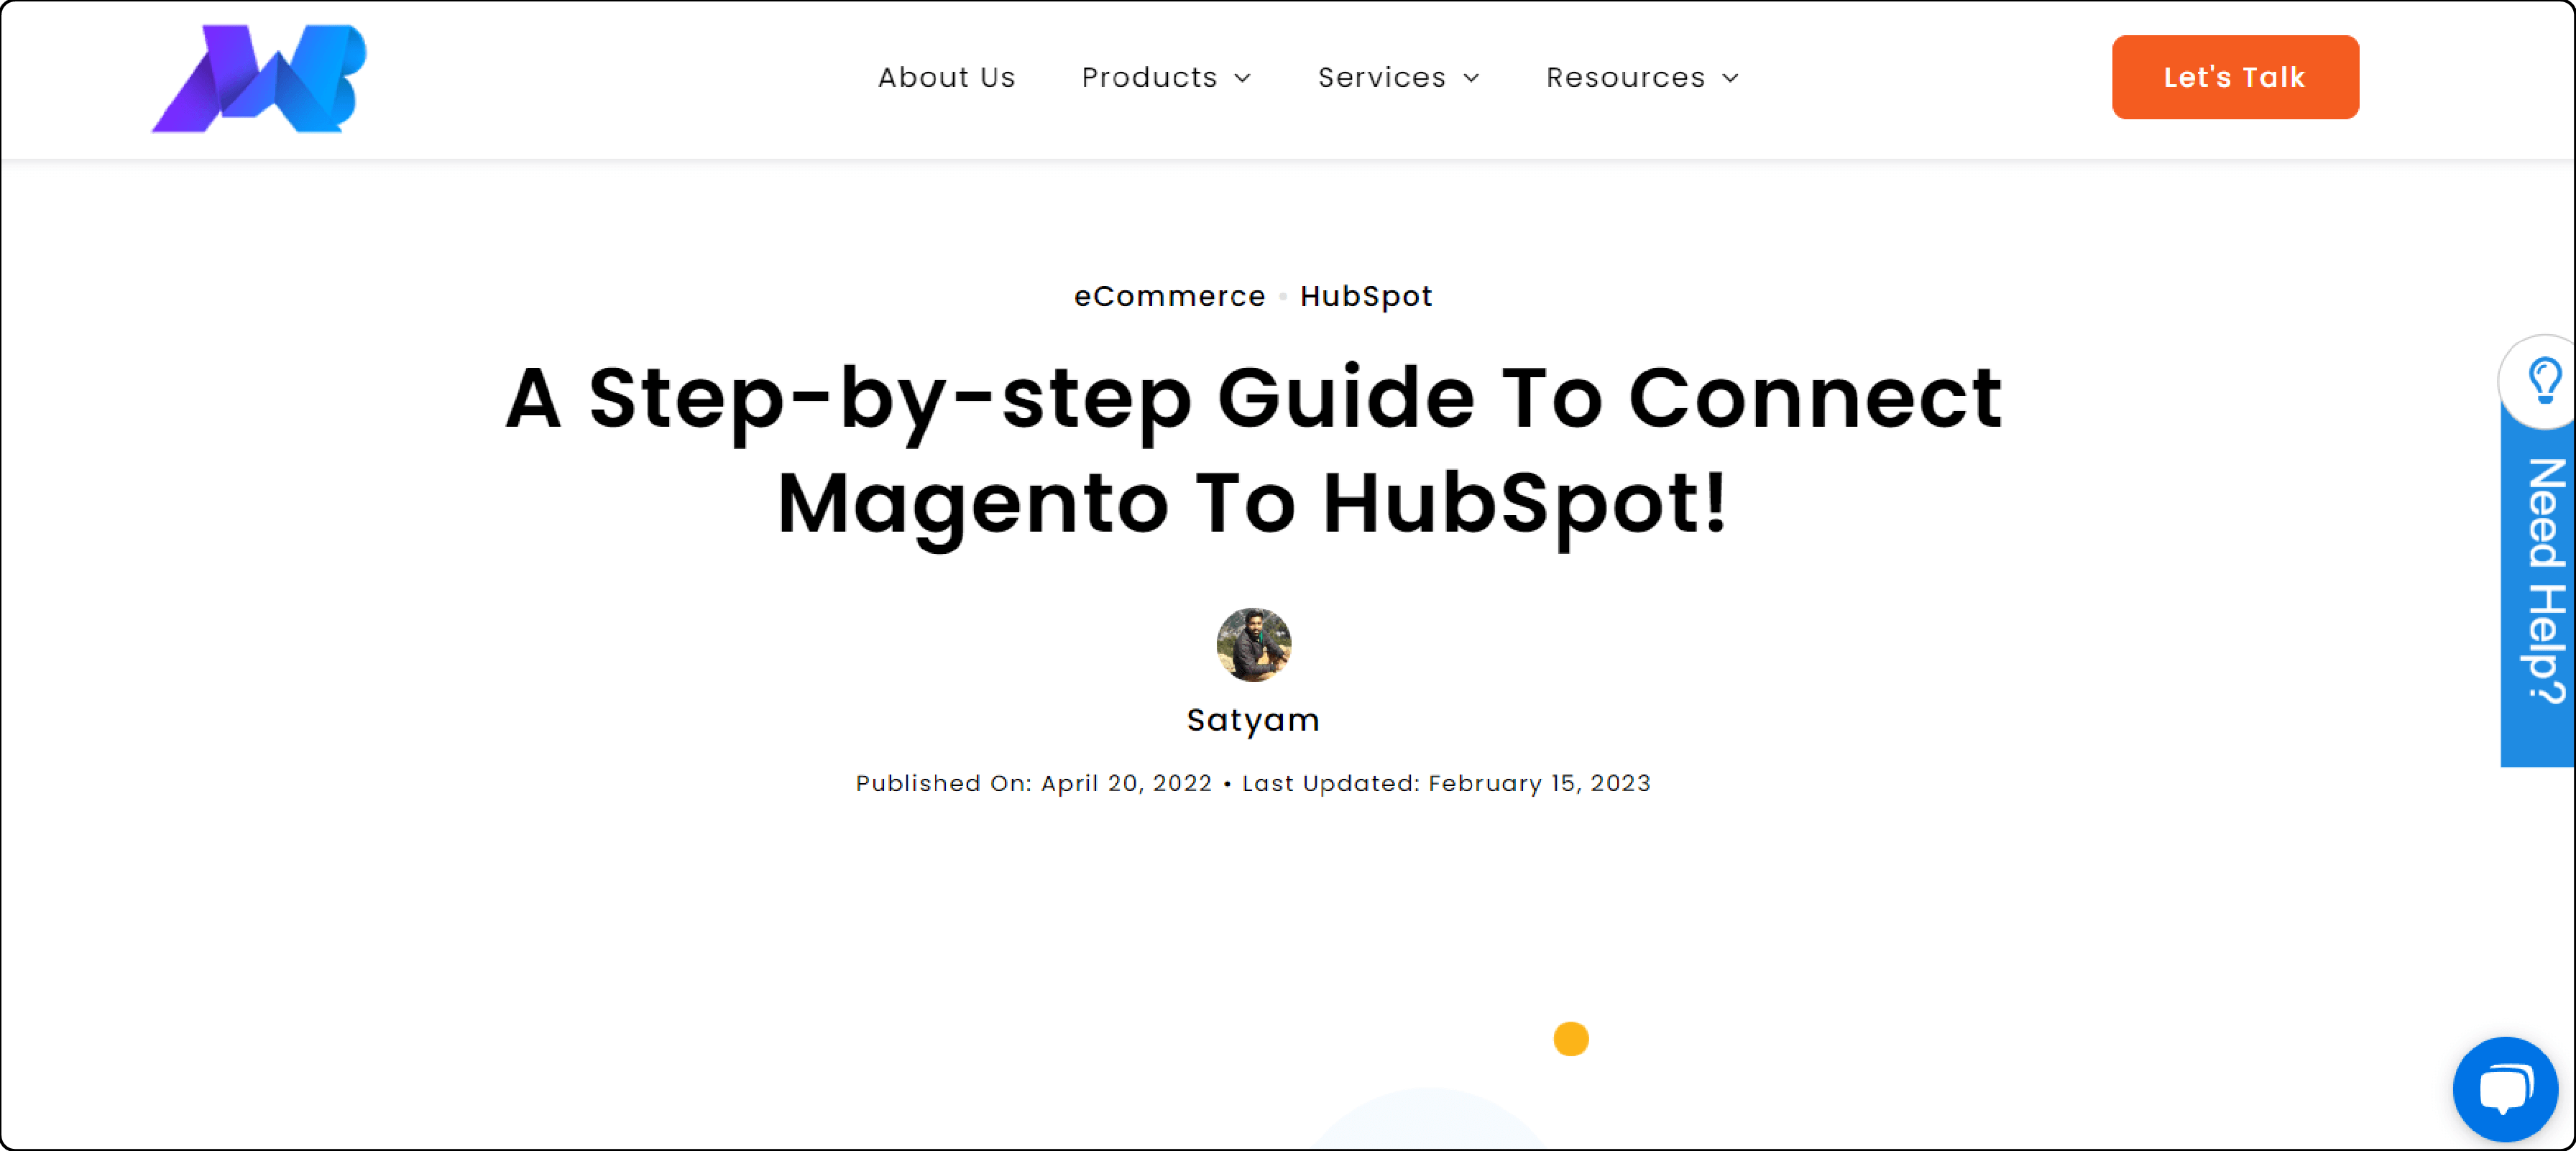 Magento Connector for HubSpot by MakeWebBetter